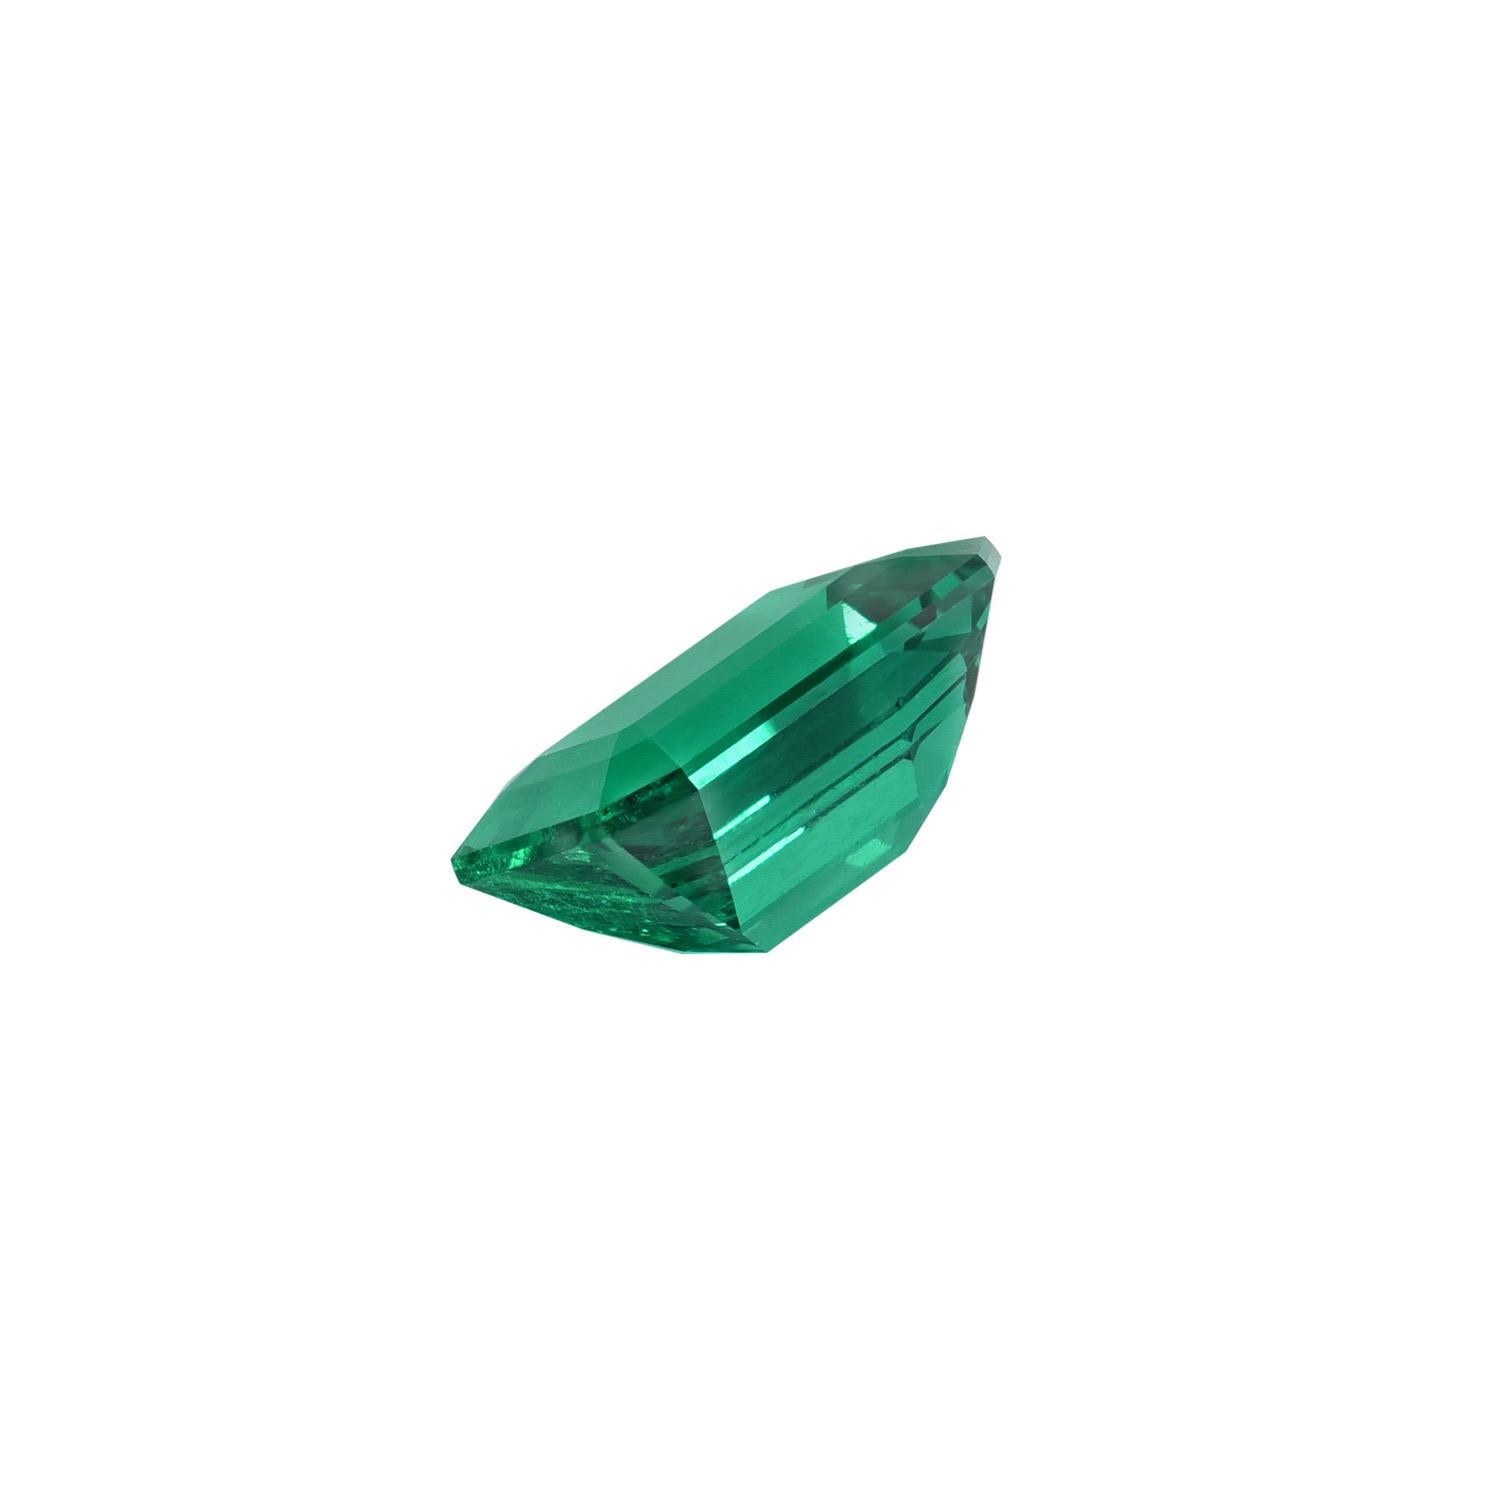 Immensely rare and highly prized Muzo Colombian Emerald 2.10 carat gem, offered unmounted to a world-class gemstone collector. This untreated, “no oil” Emerald, is nearly “loupe clean” and it emits an extremely coveted inner glow. This exceptional